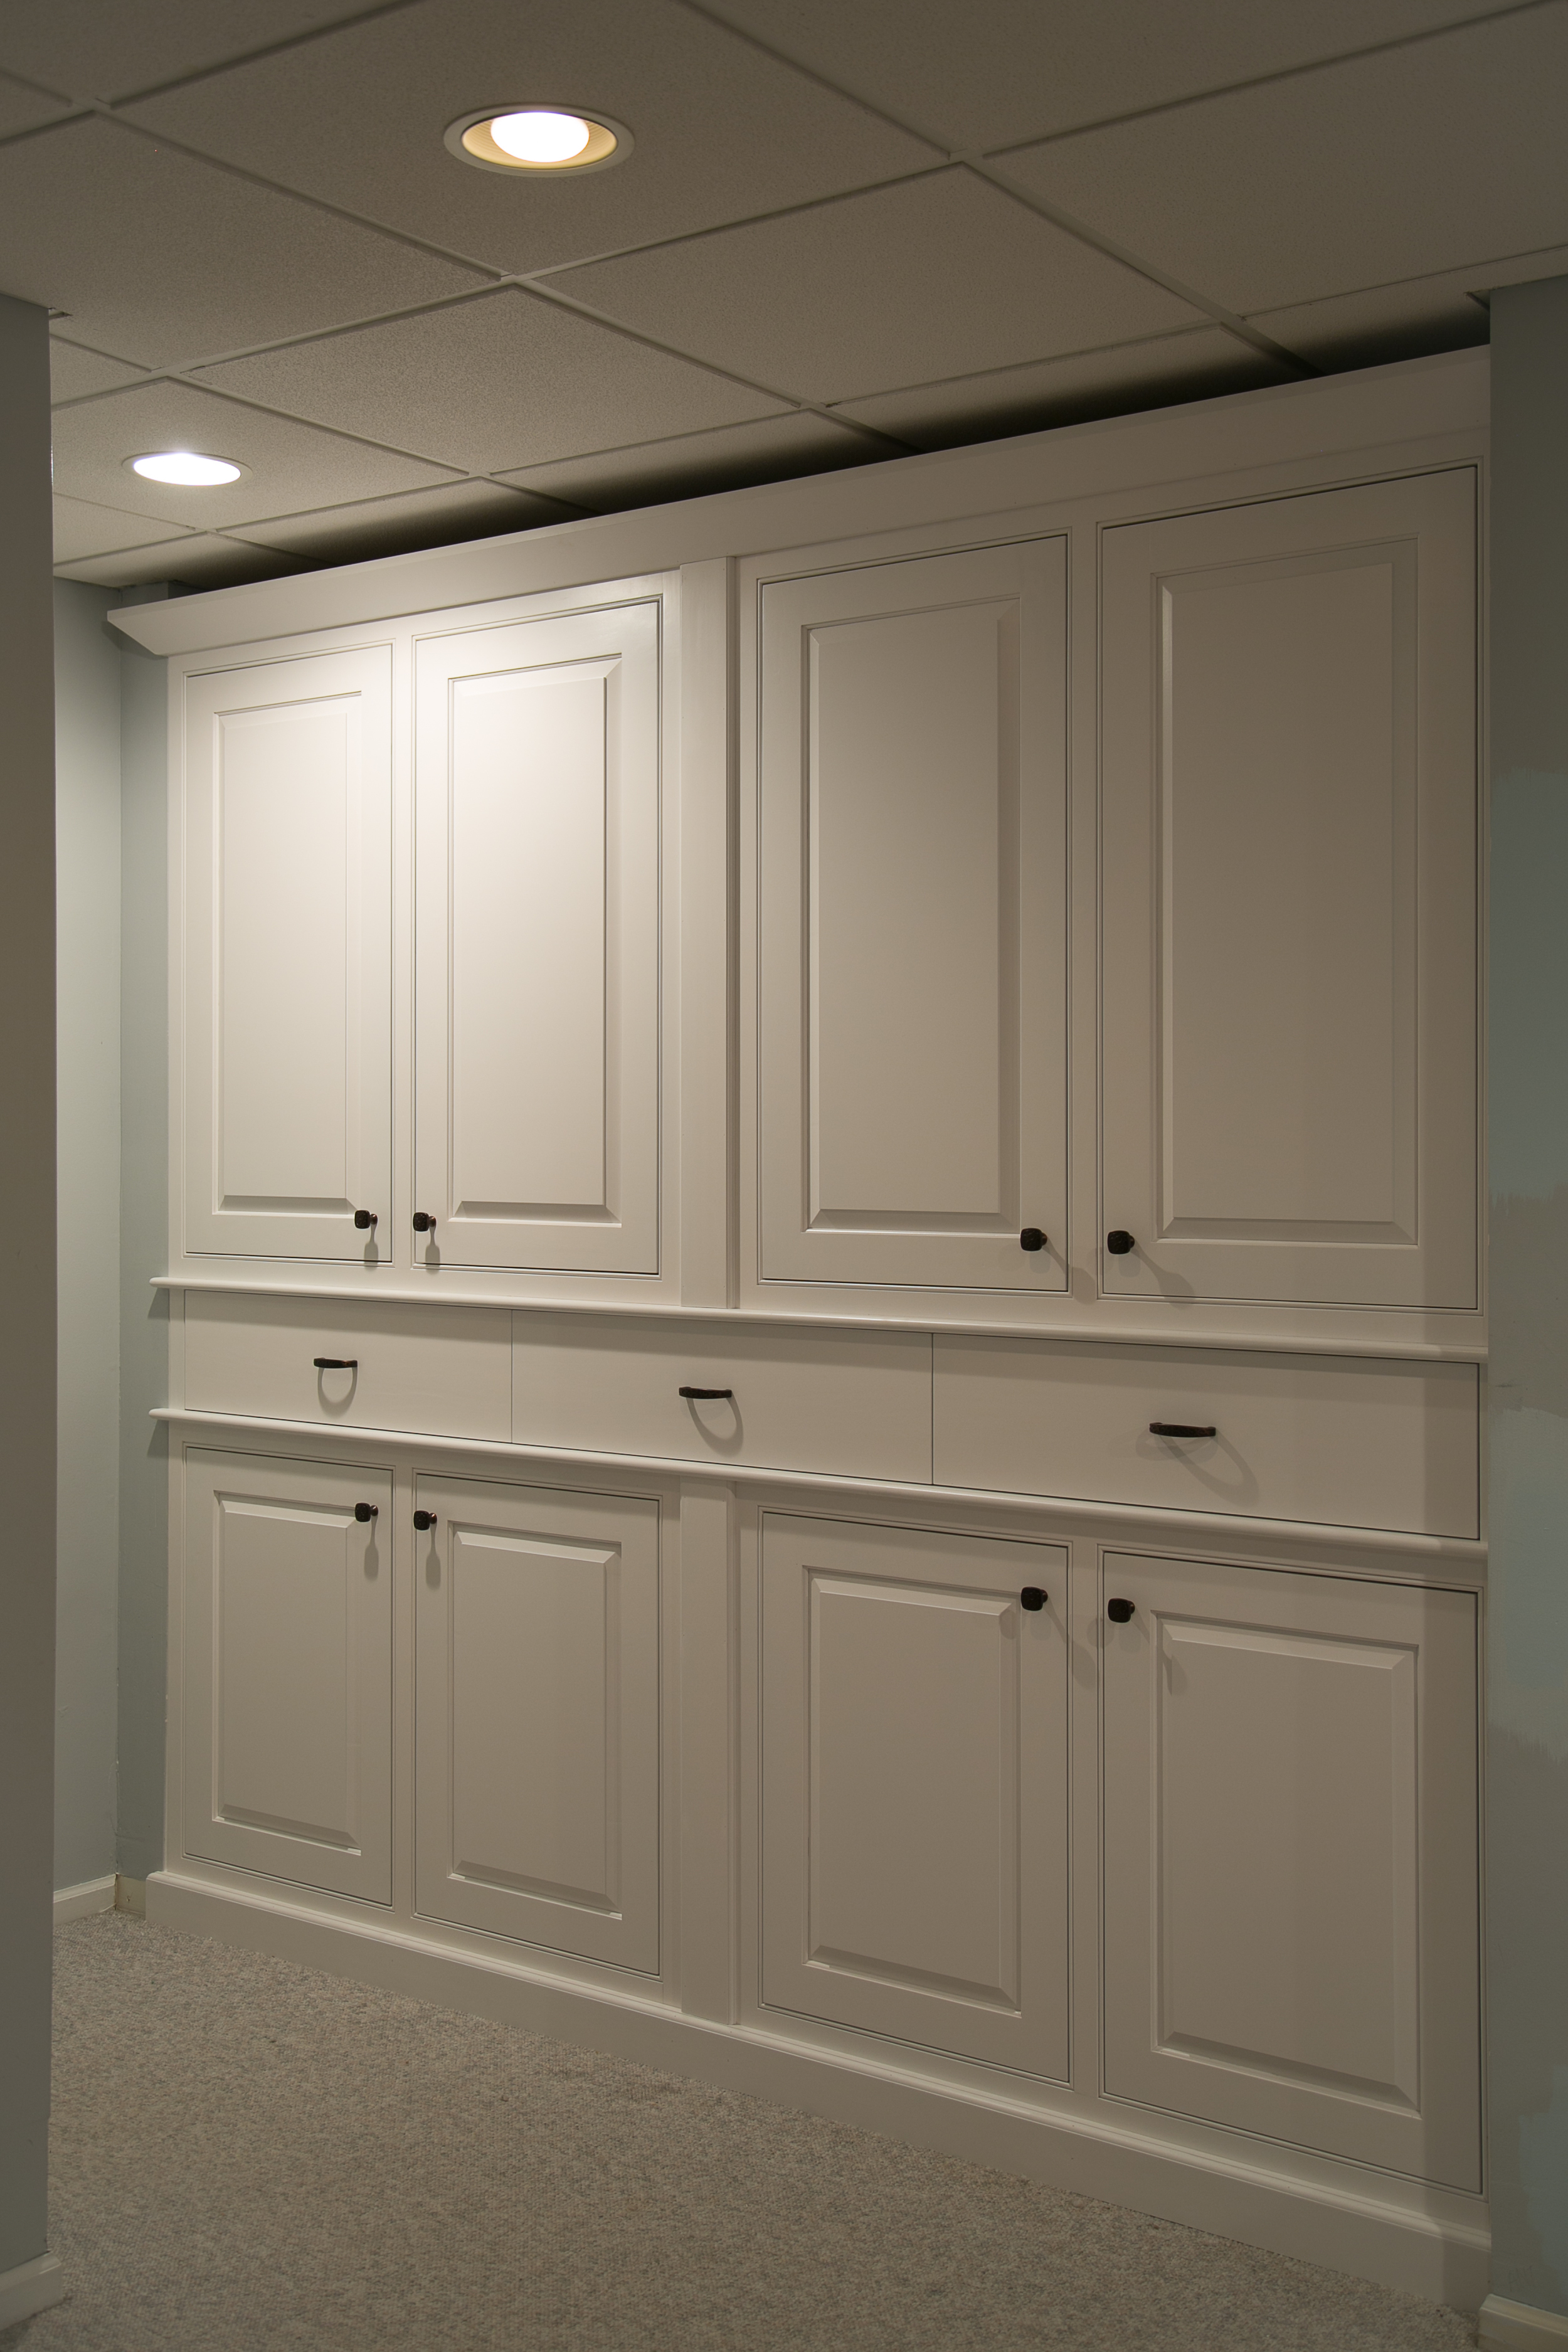 Built-In Storage Cabinets